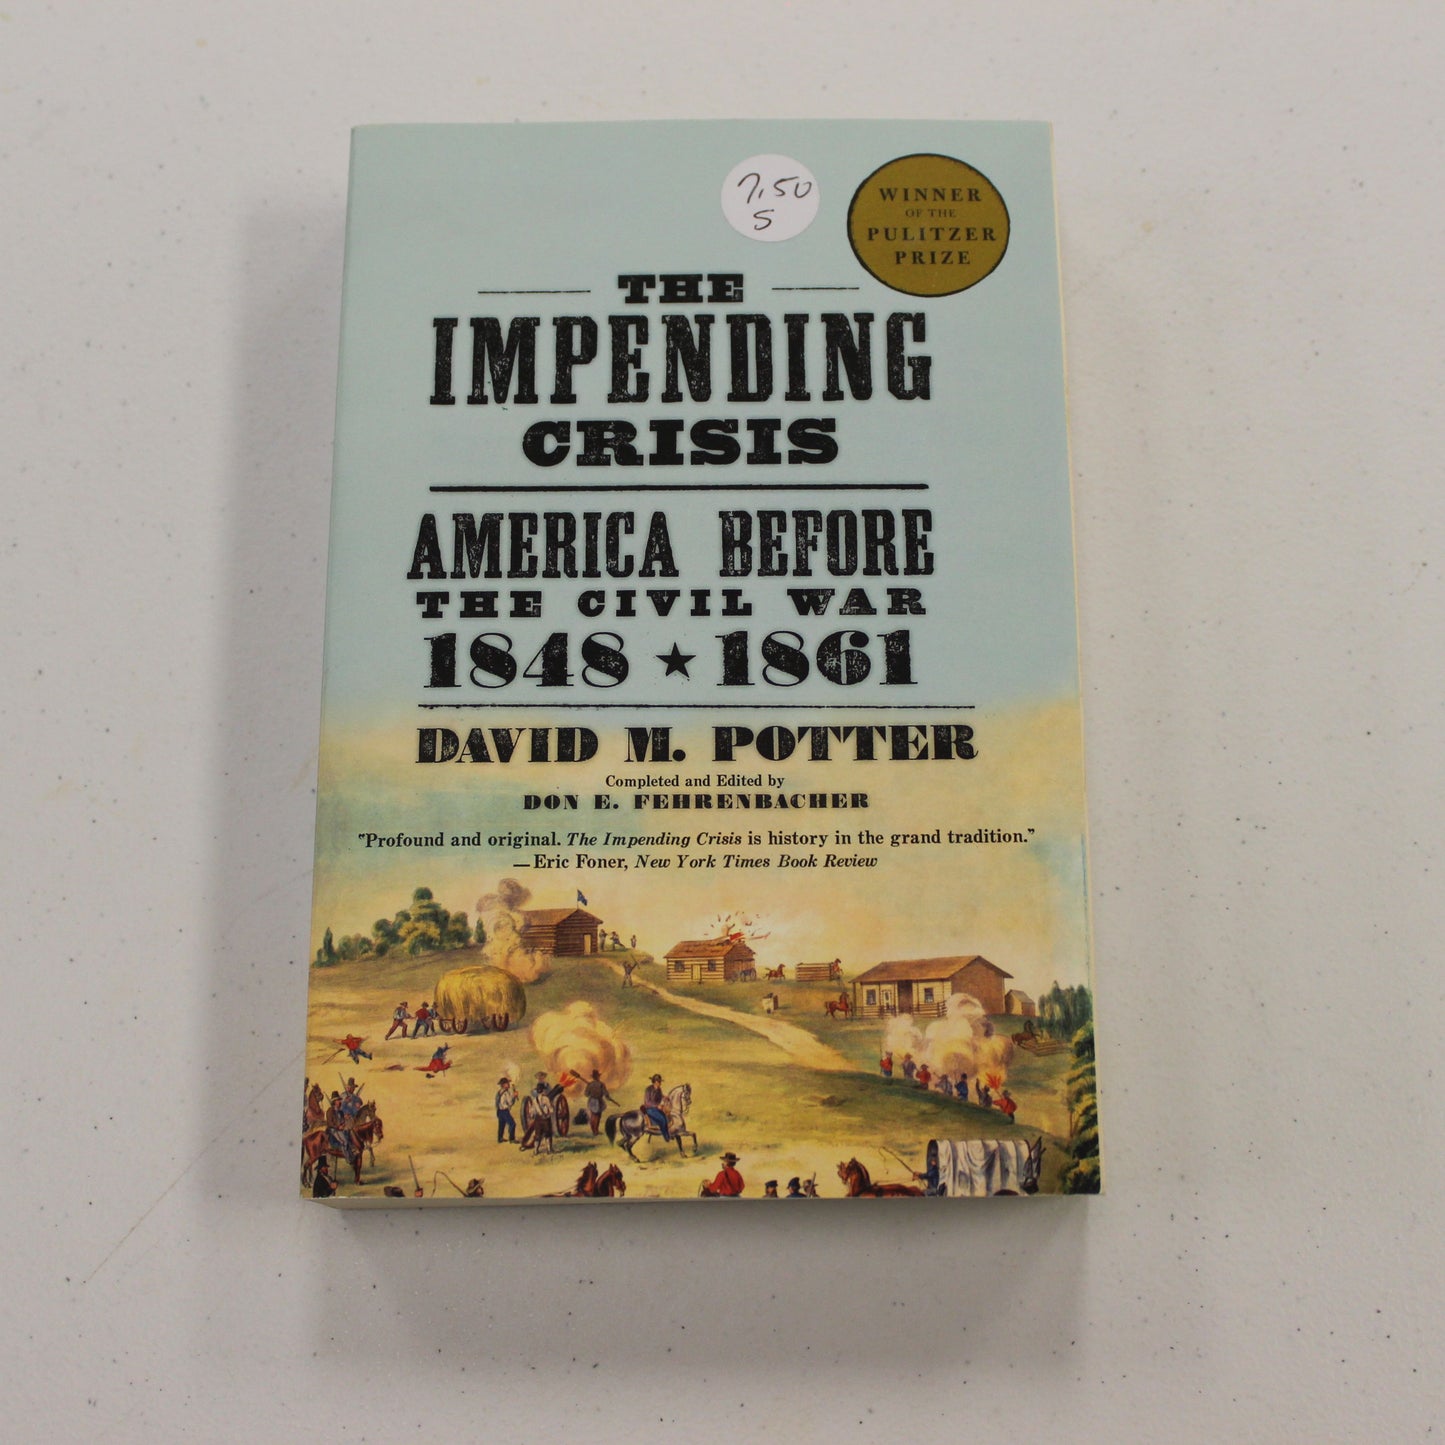 THE IMPENDING CRISIS AMERICA BEFORE THE CIVIL WAR 1848-1861